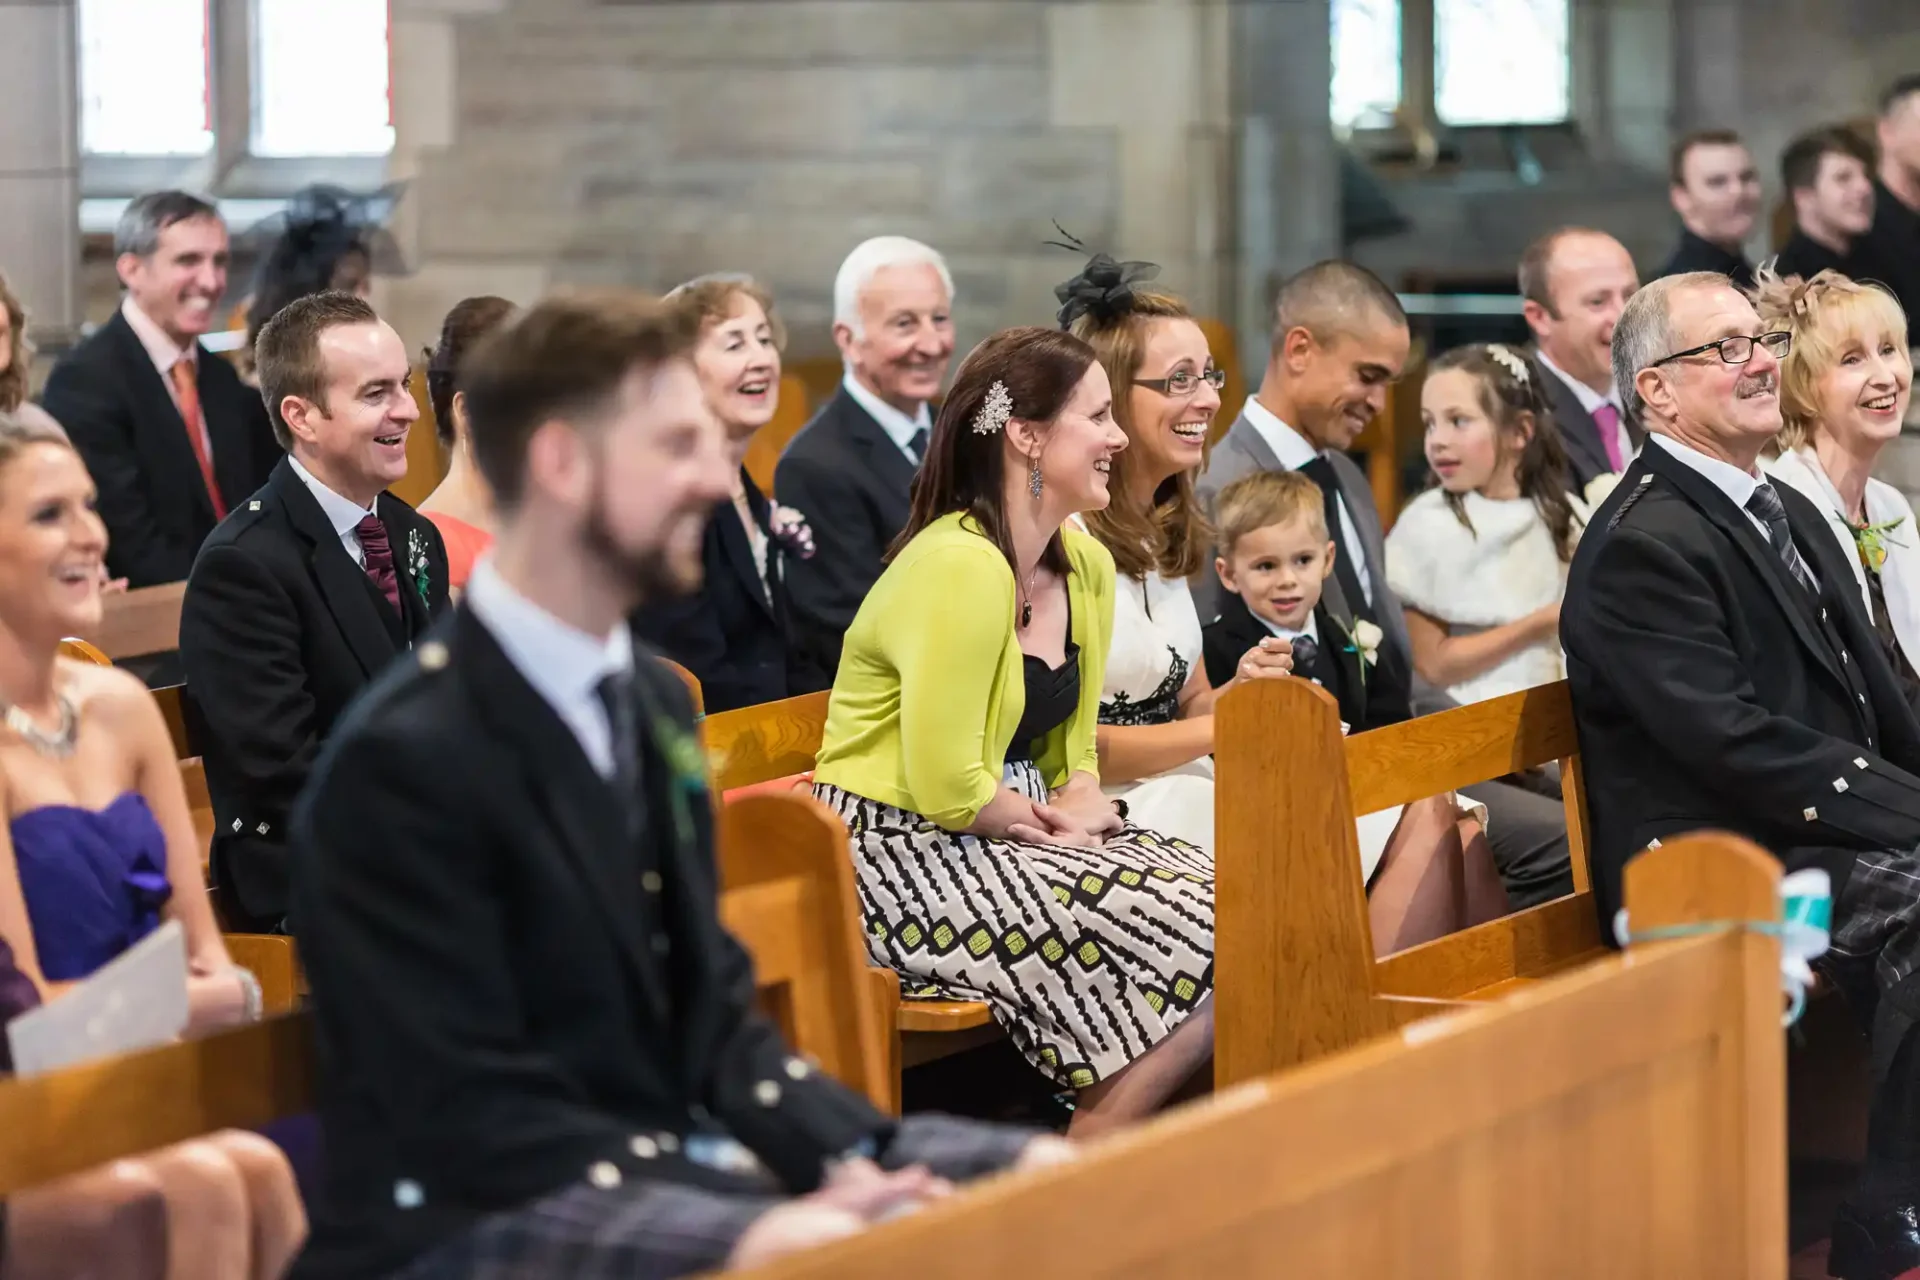 Guests in formal attire smiling and seated in church pews during a wedding ceremony.